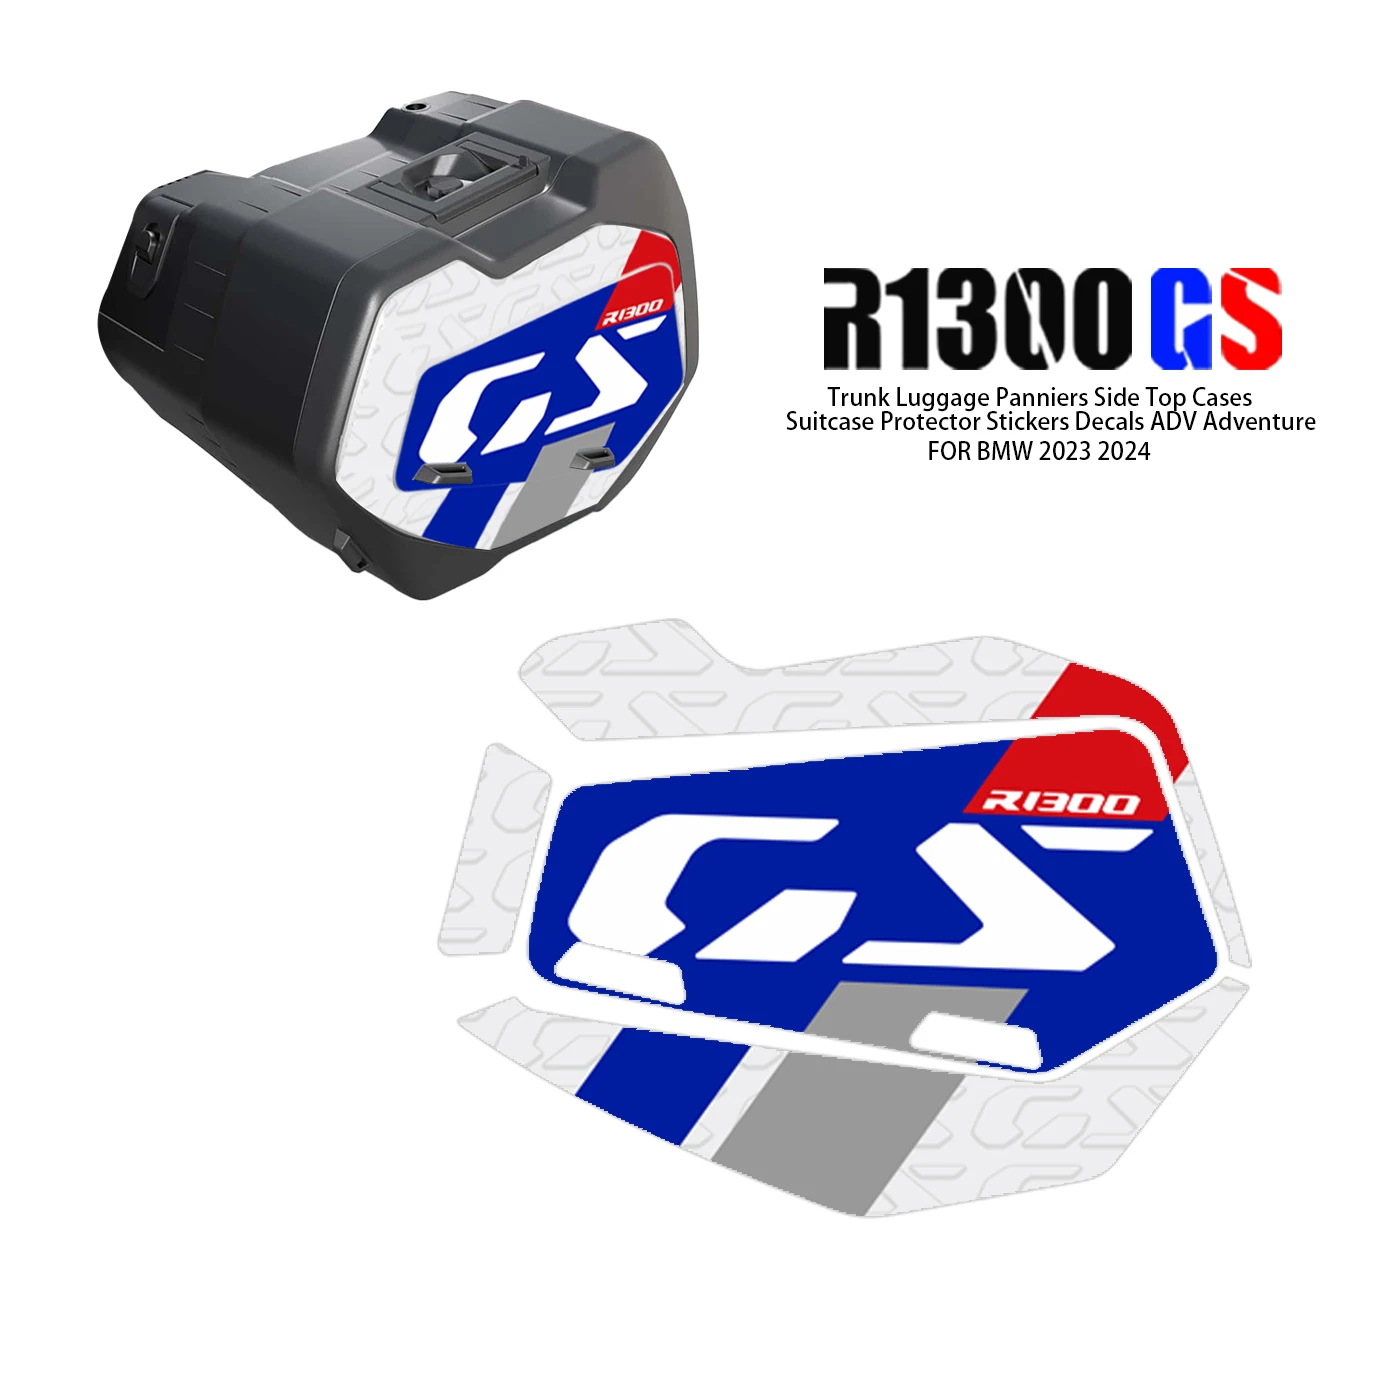 R1300GS FOR BMW 2023 2024 Trunk Luggage Panniers Side Top Cases Suitcase Protector Stickers Decals ADV Adventure